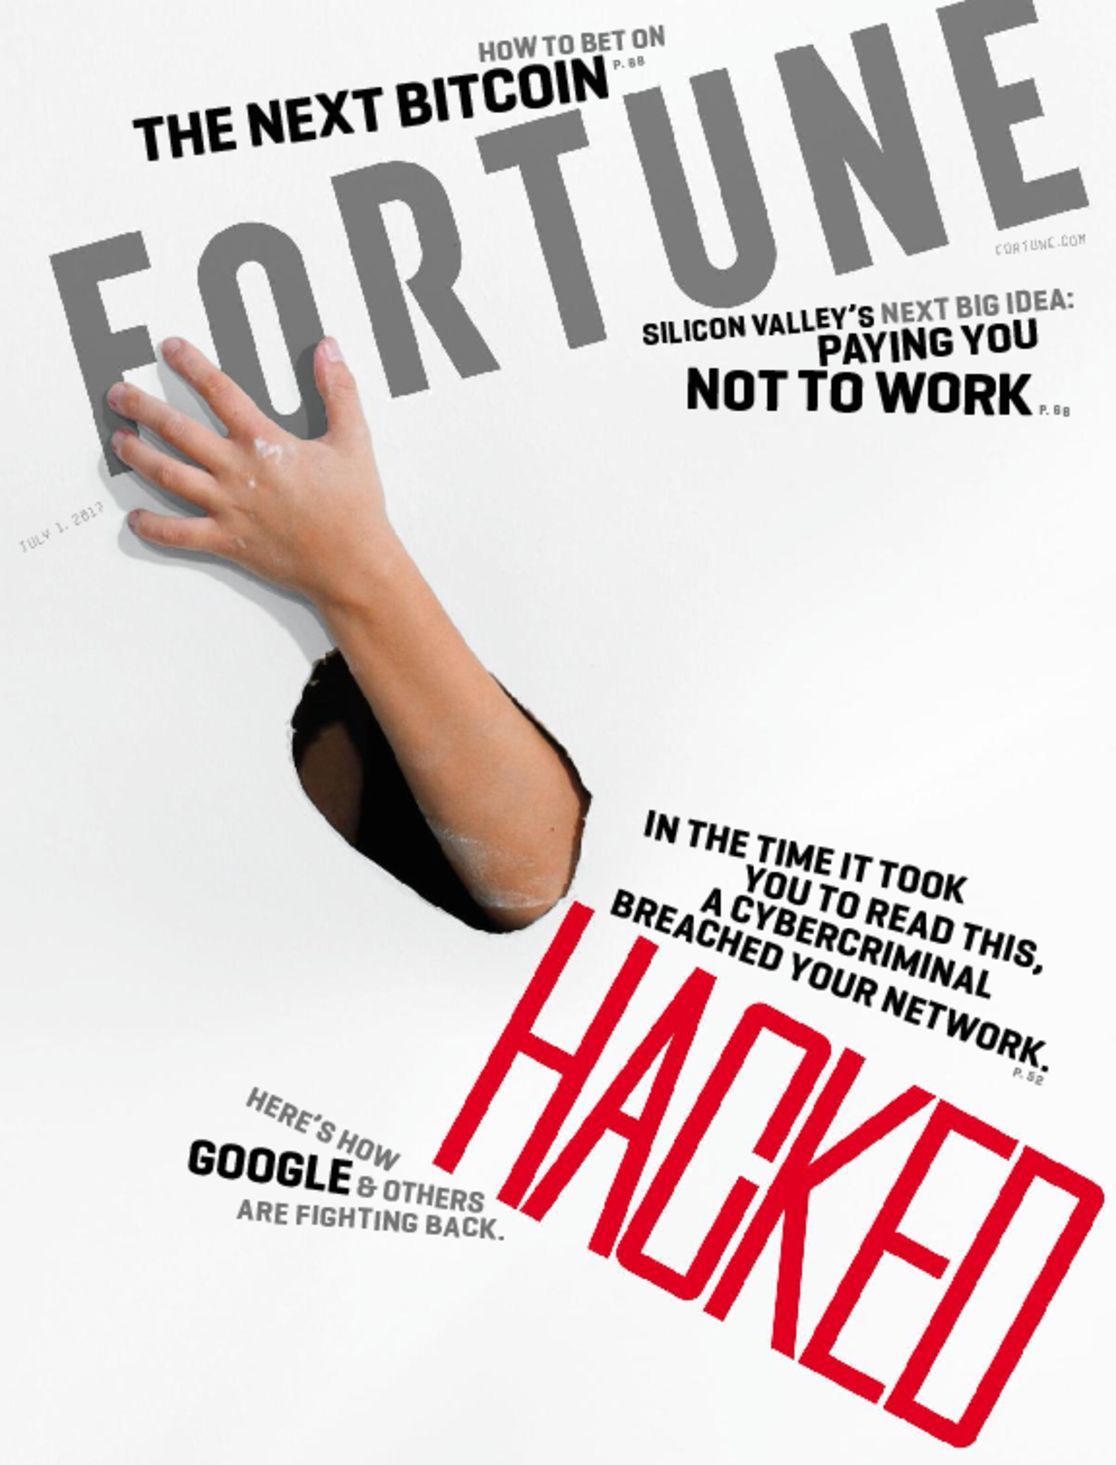 Fortune Magazine | Latest Business News - DiscountMags.com